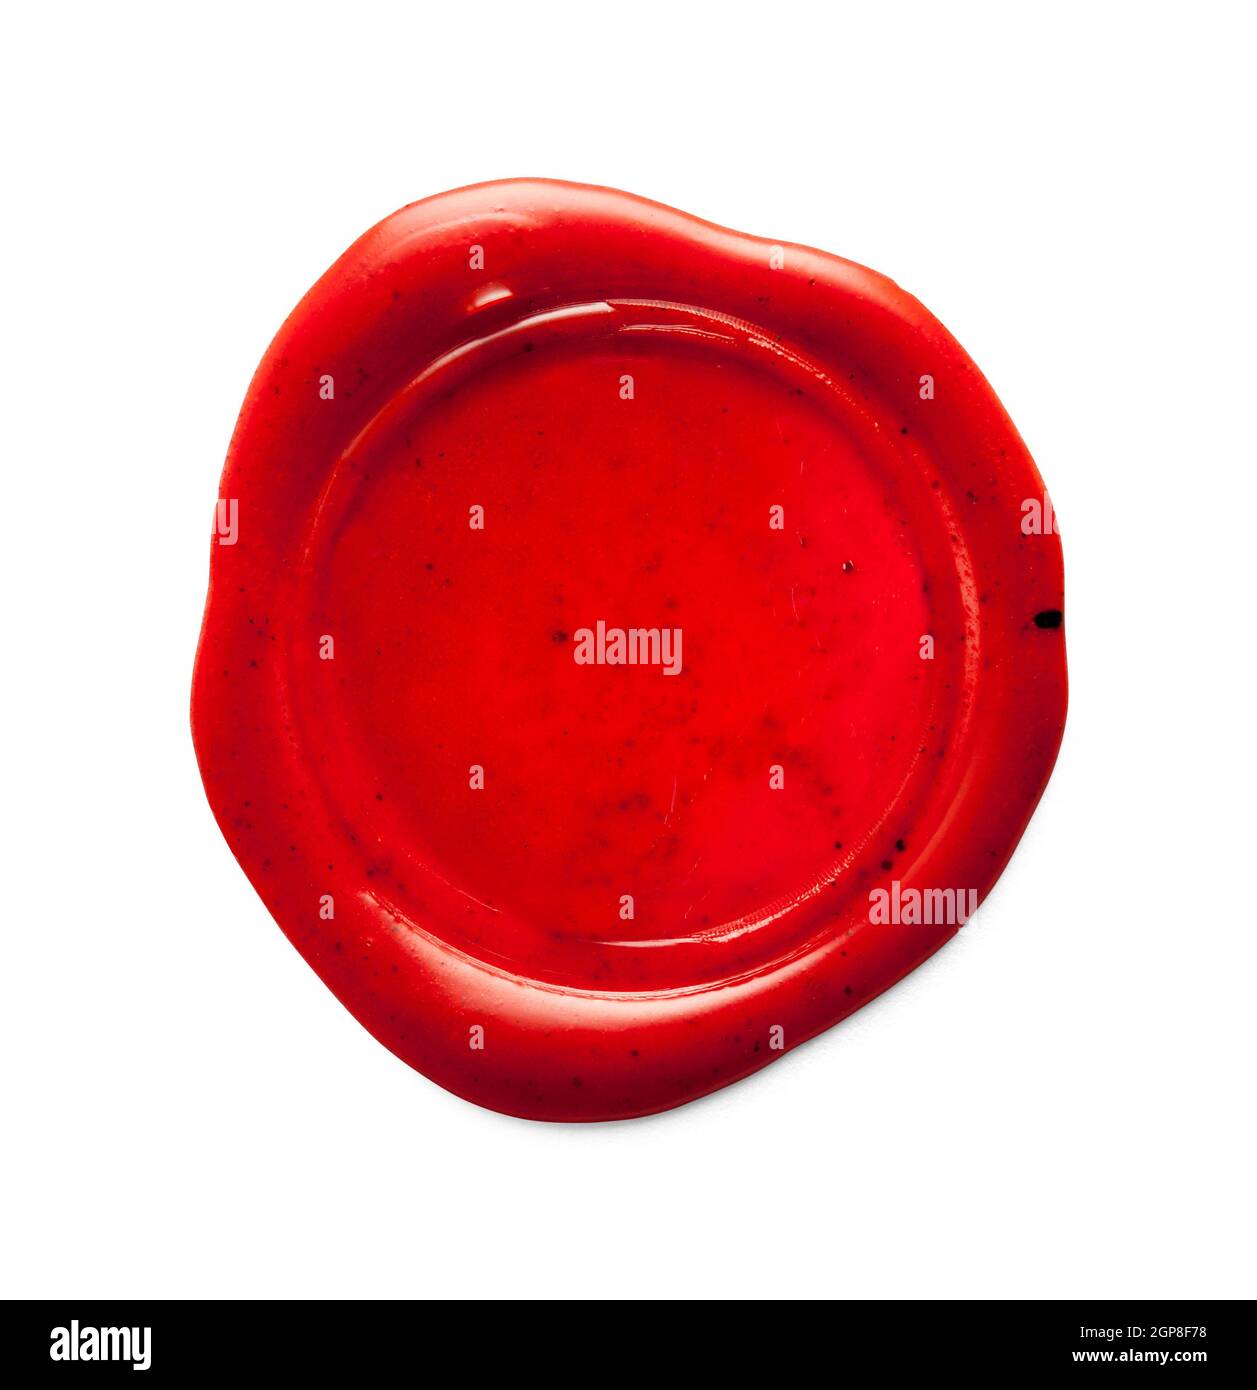 Stamp Seal High Resolution Stock Photography and Images - Alamy